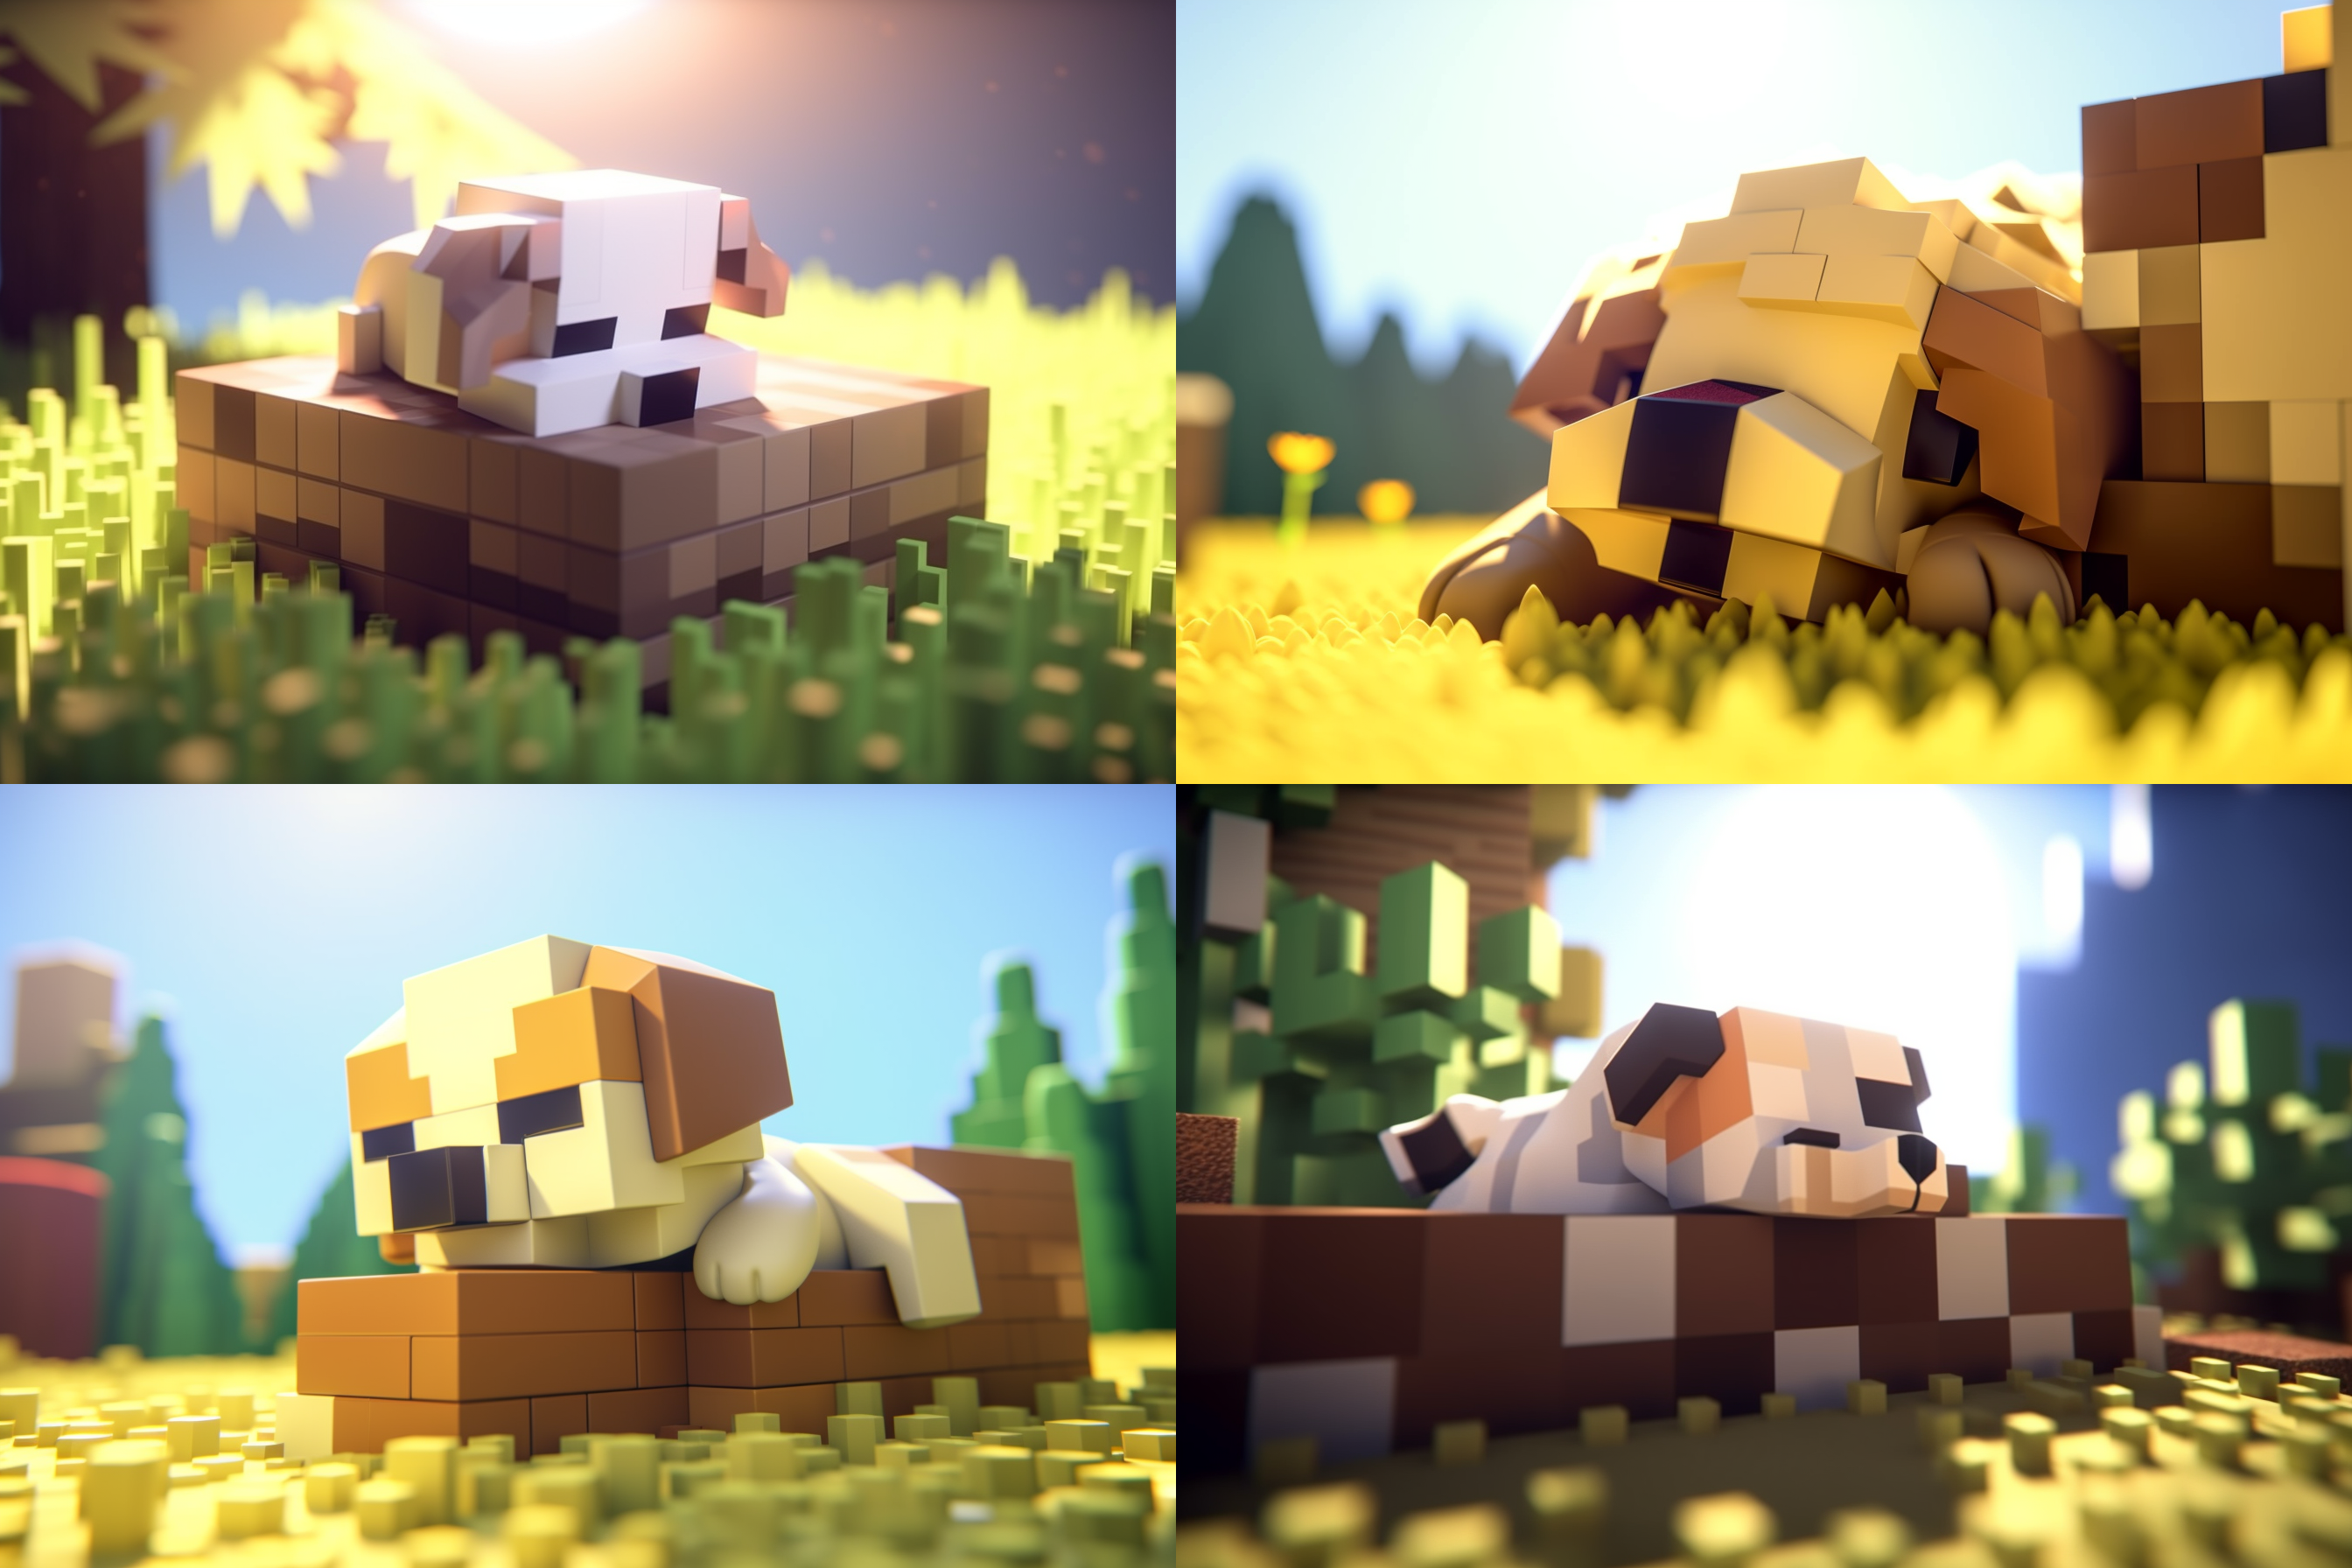 Some Minecraft Bees wallpapers that Ive done when I was tired  bees post   Imgur